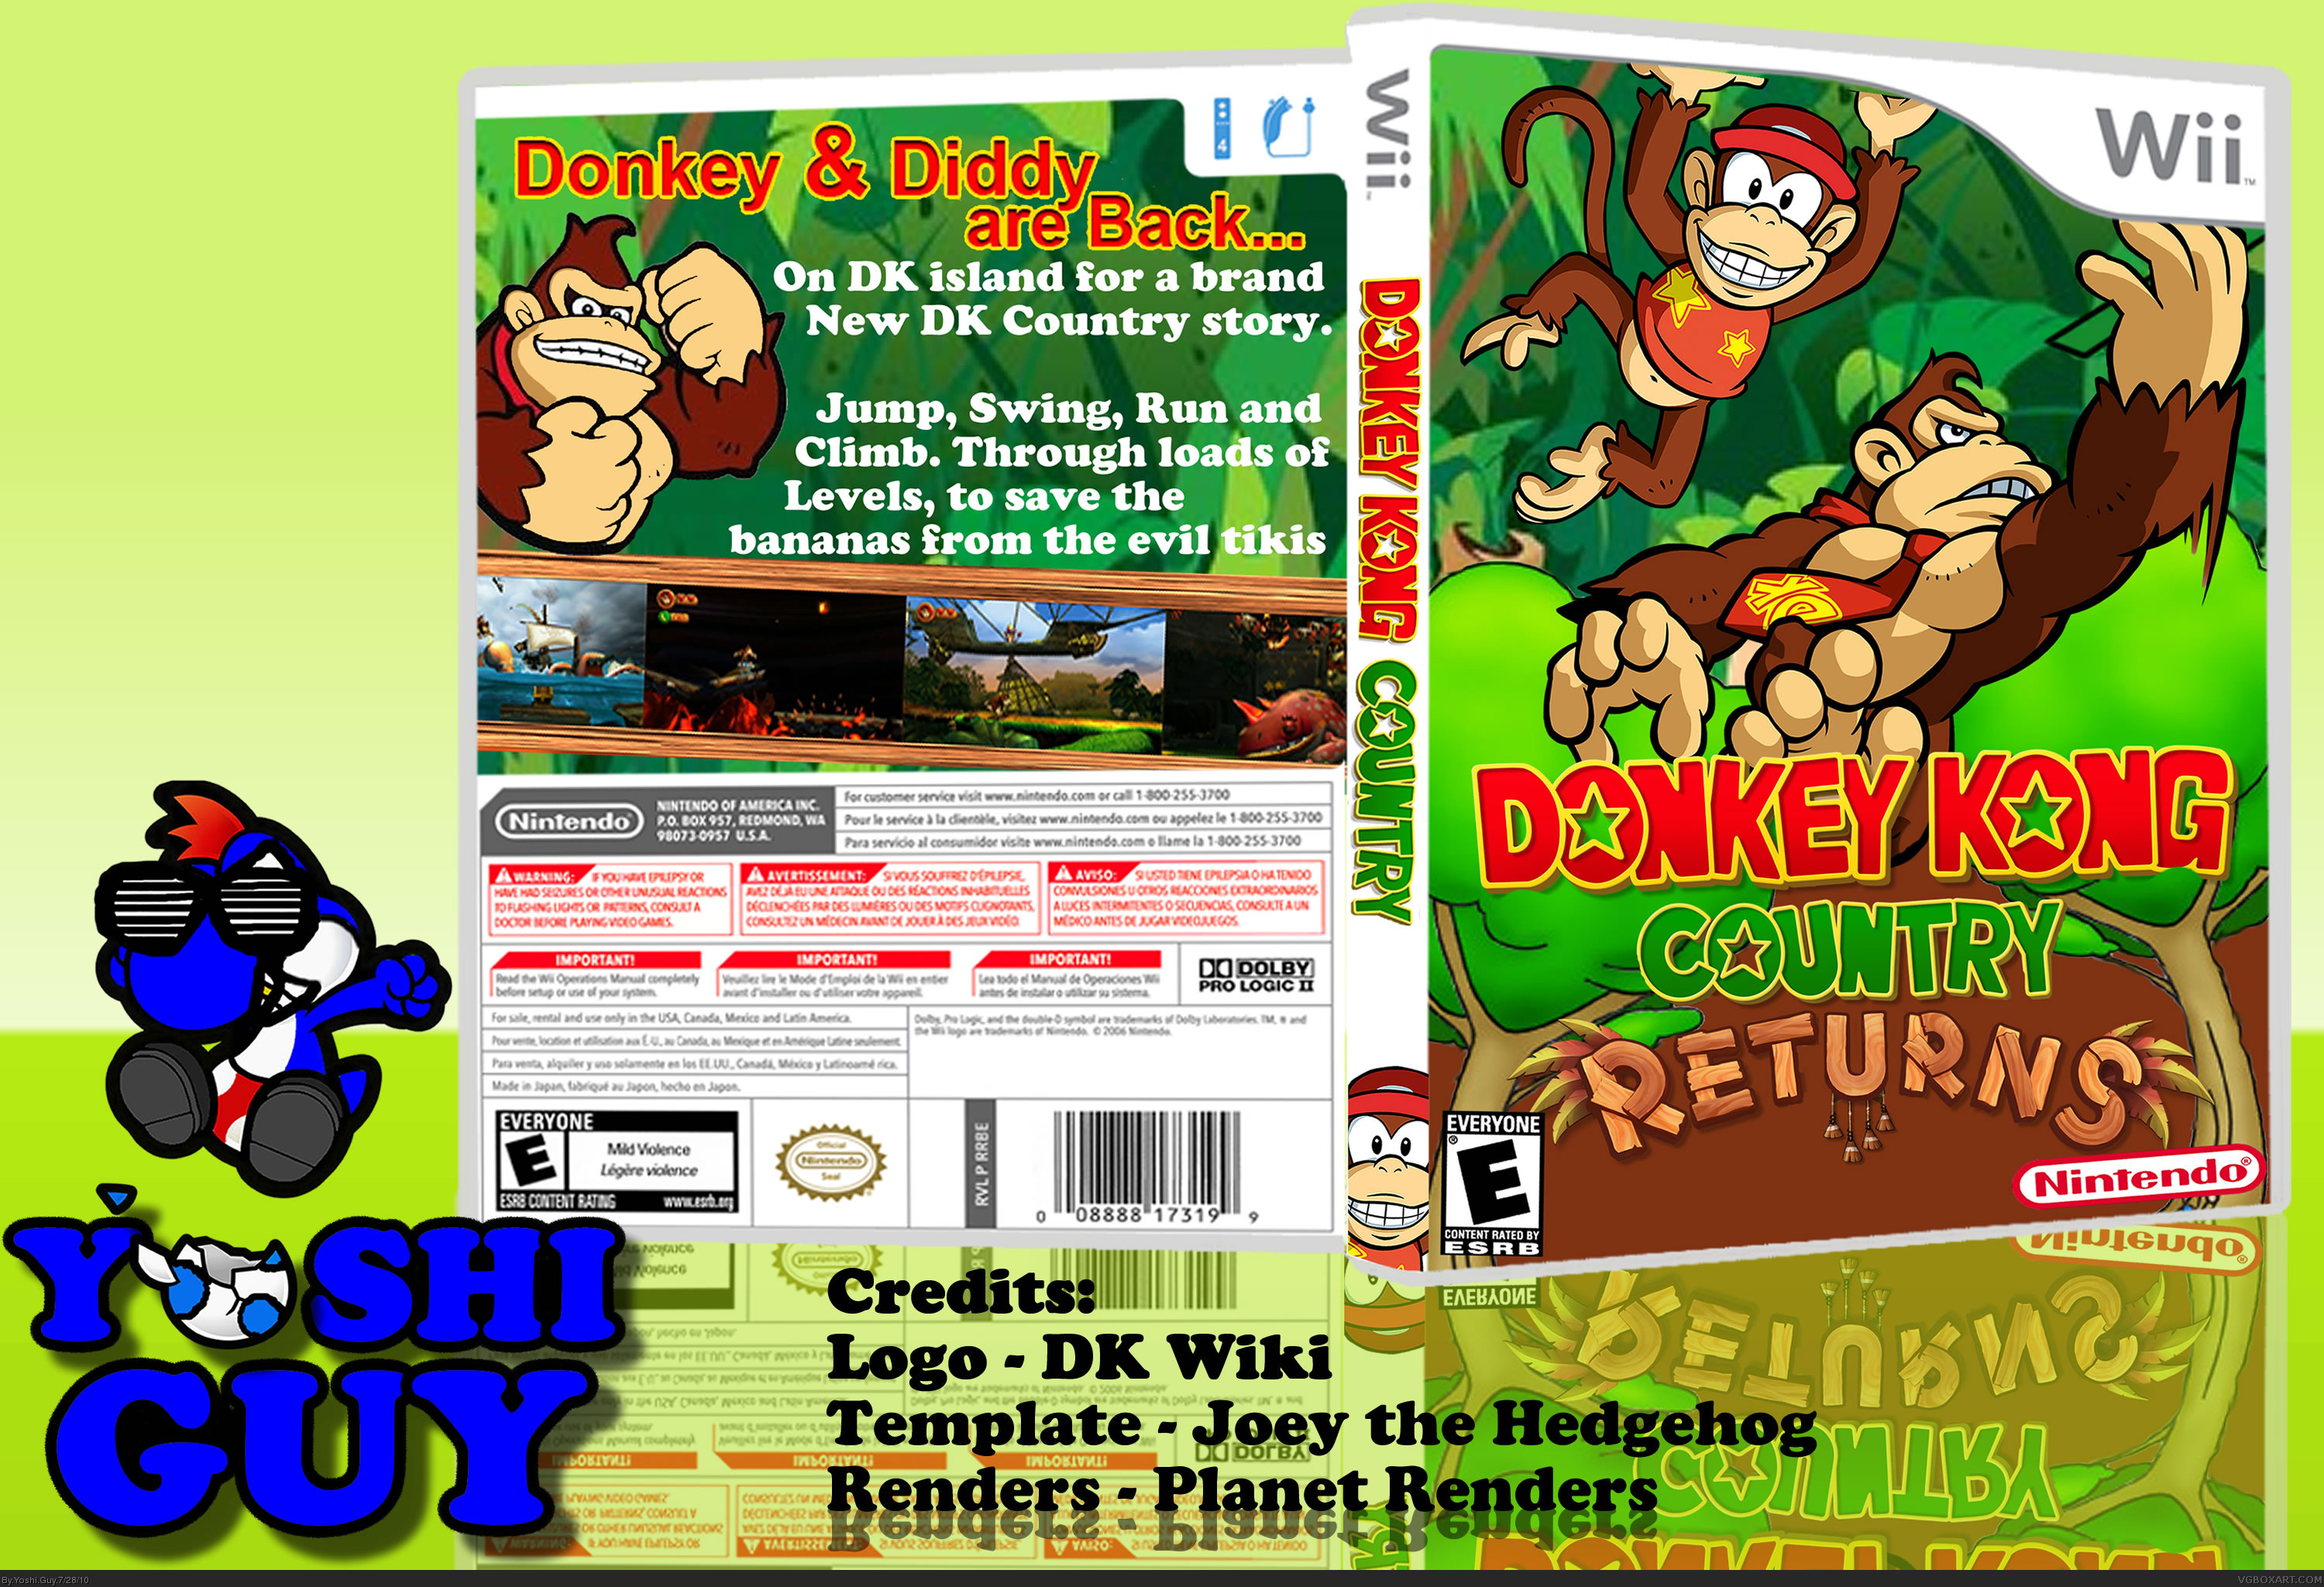 Donkey Kong Country Returns box cover